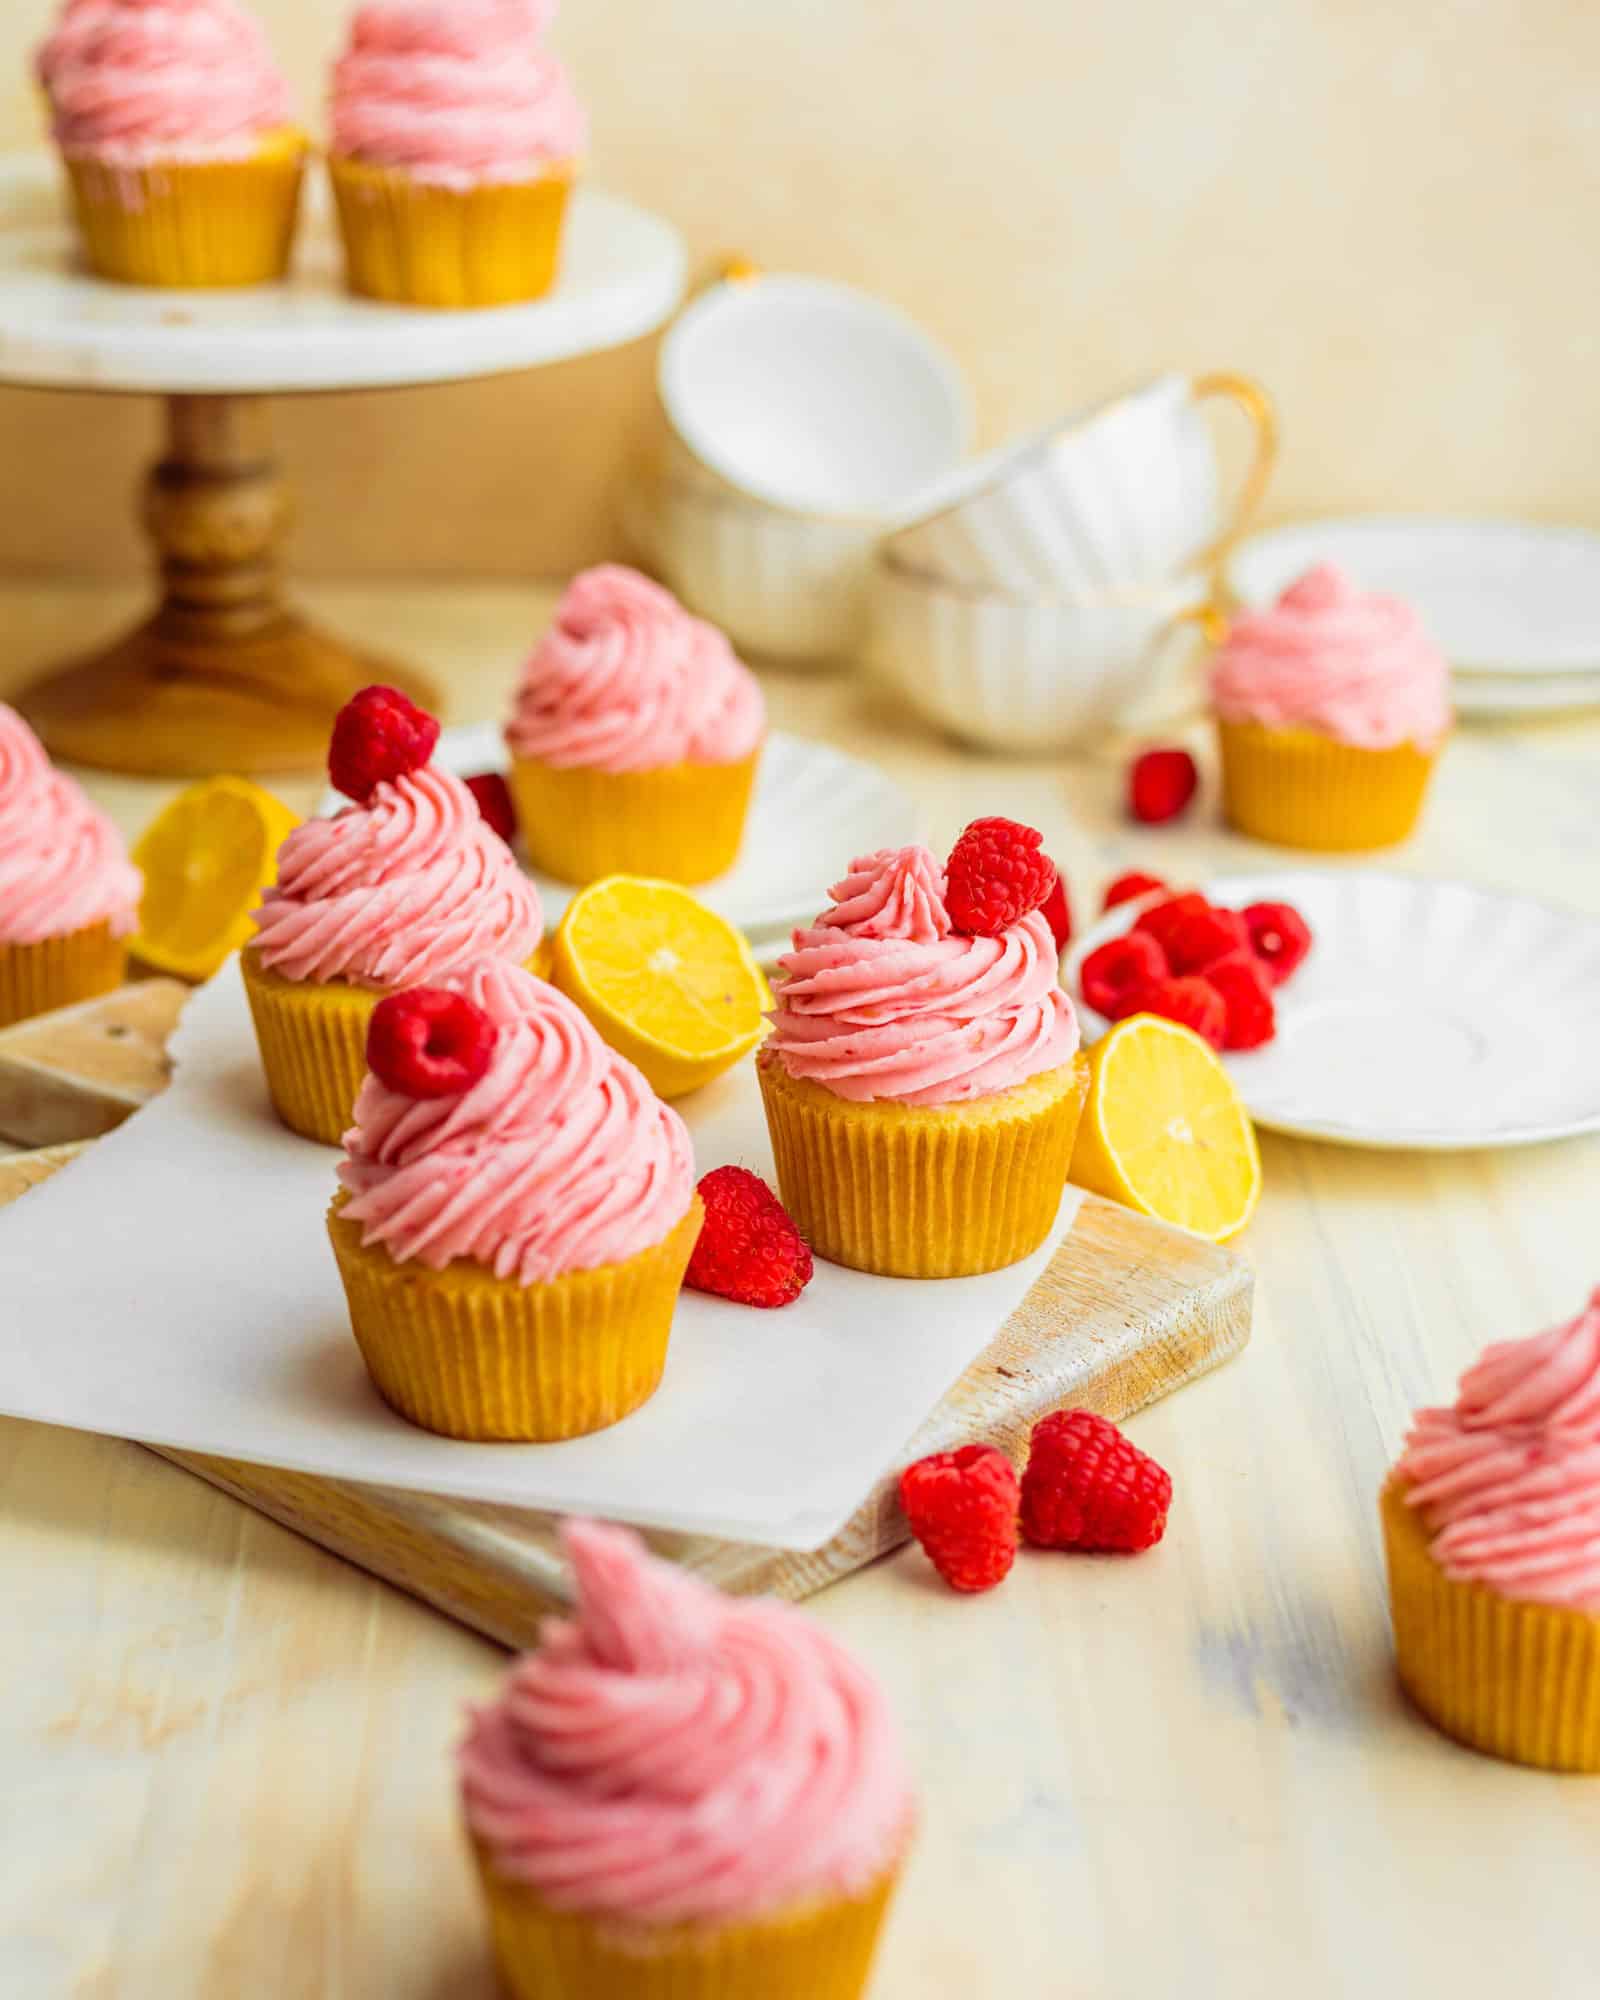 lemon raspberry cupcakes on a serving board with fresh raspberries and lemon slices